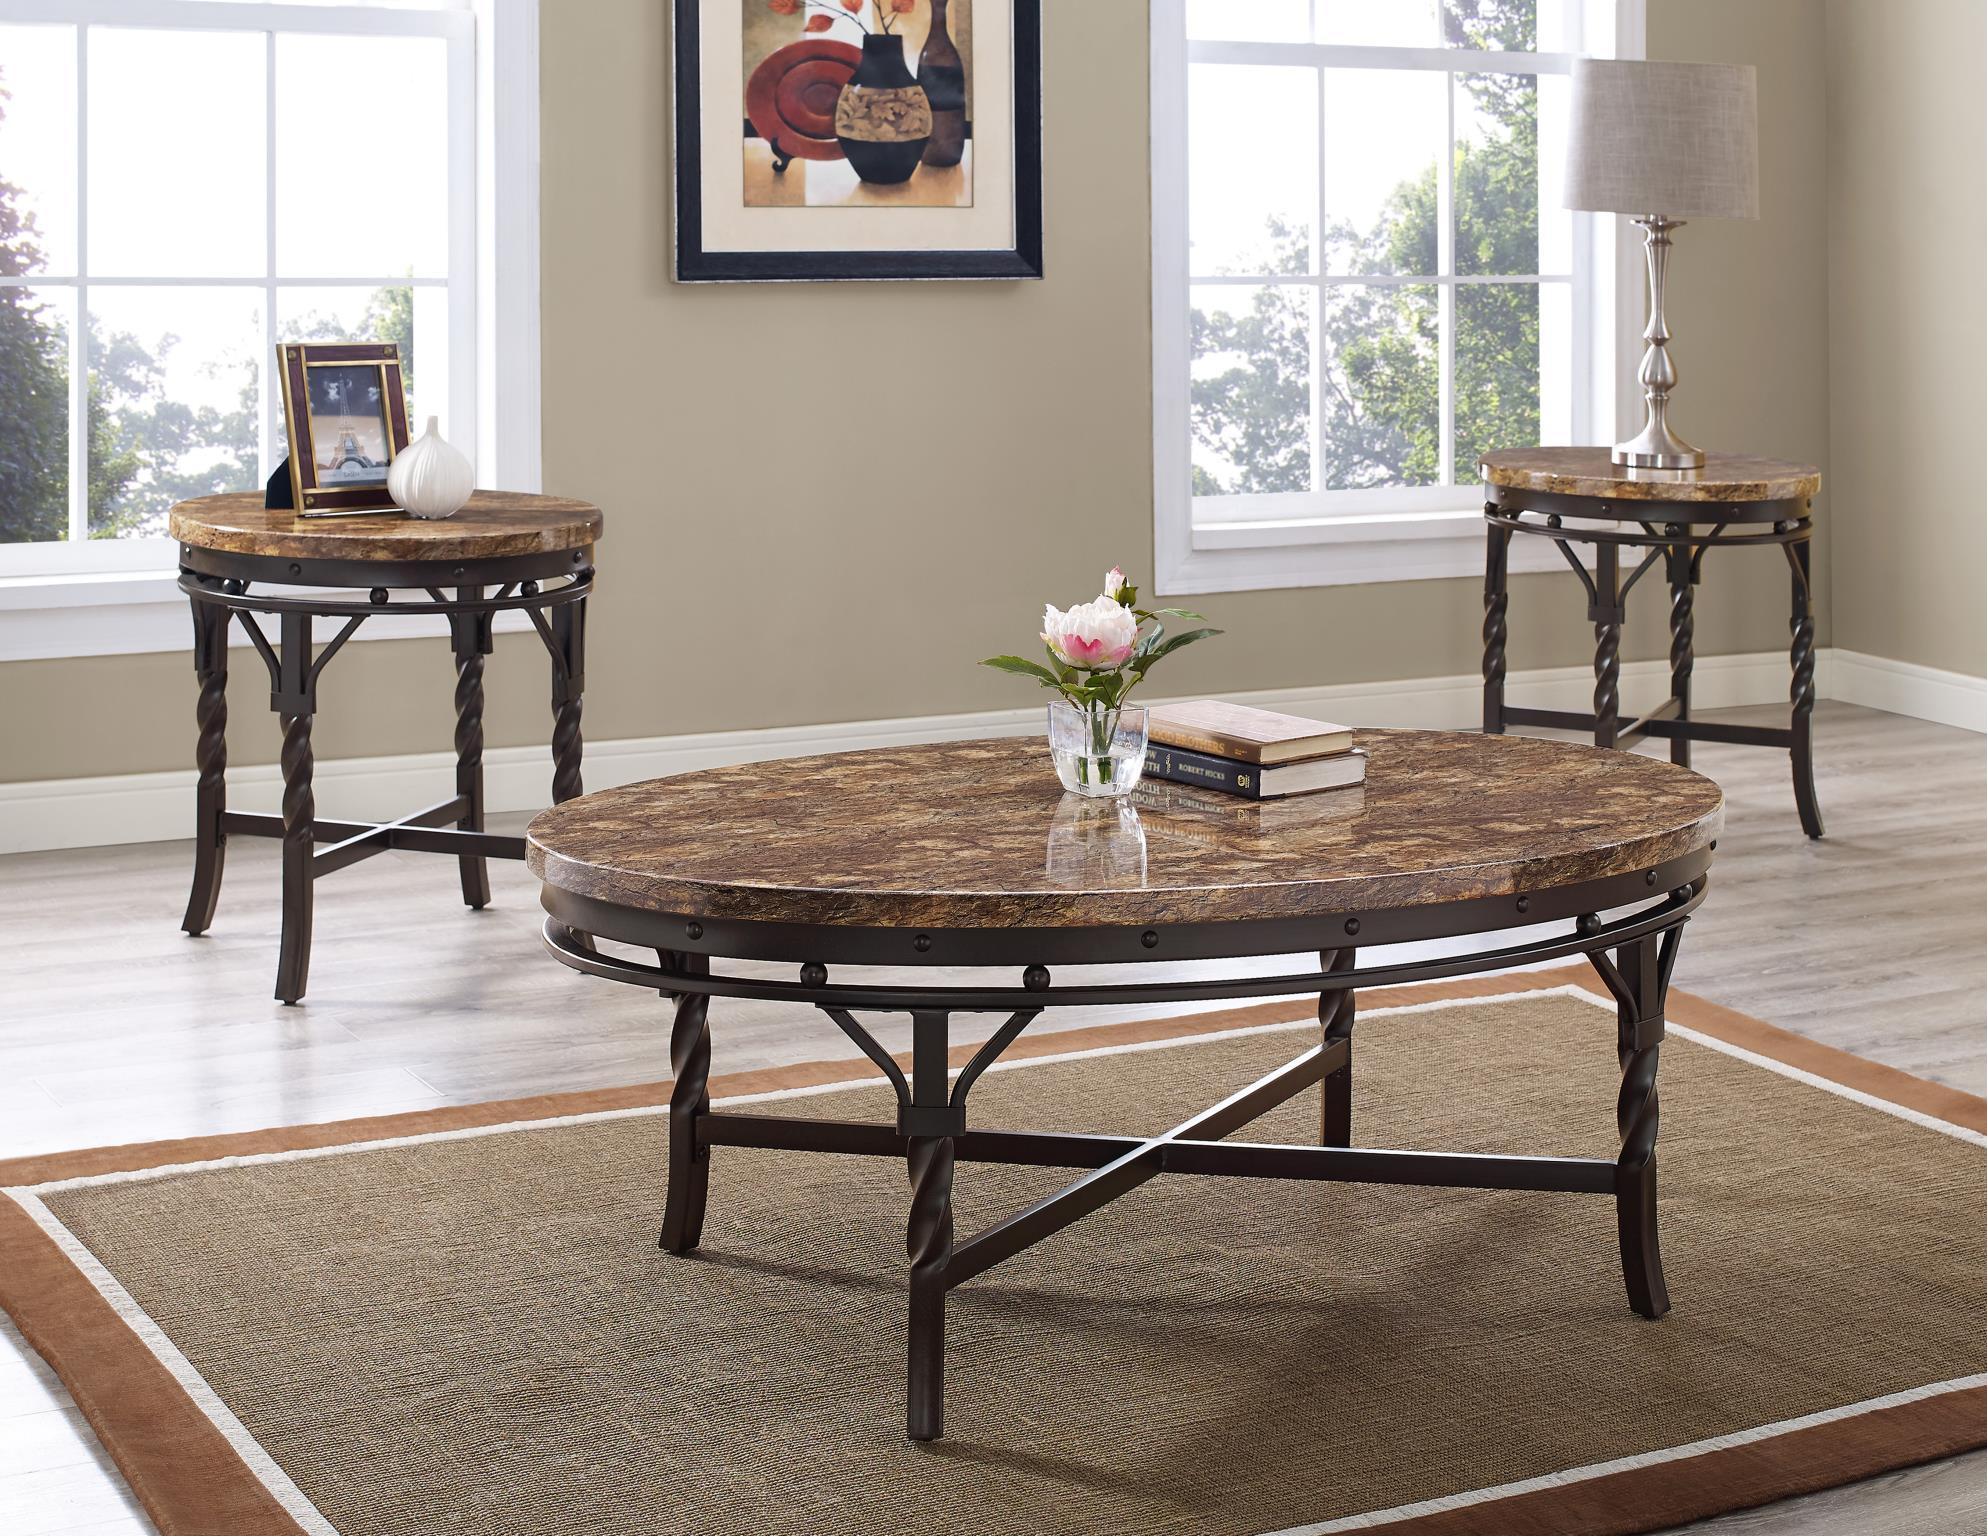 Contemporary, Transitional Coffee Table Set Tuscan 9550 9550 in Brown, Black 